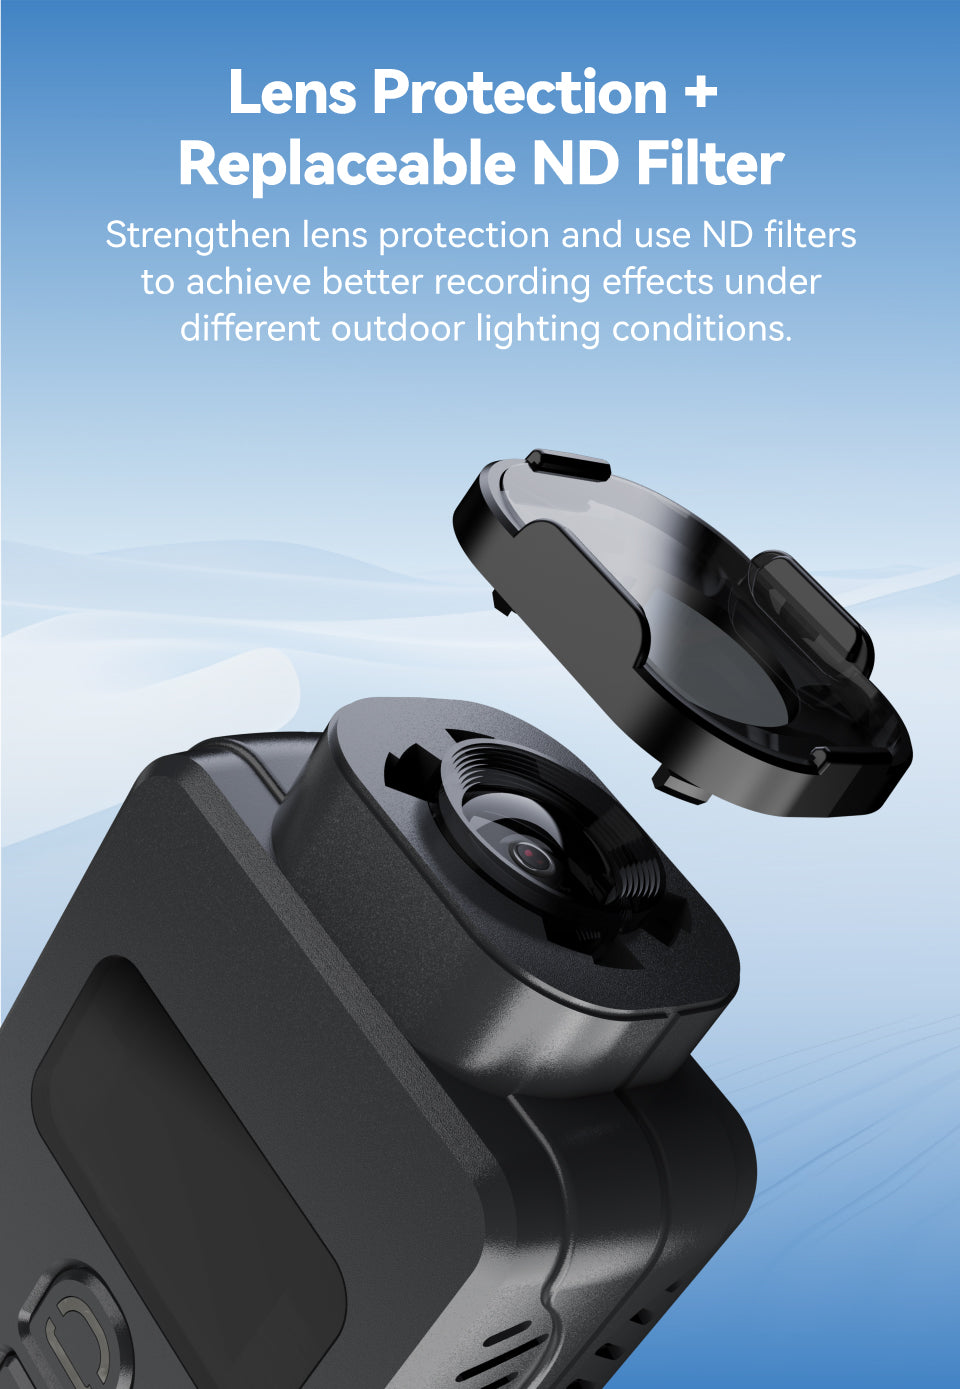 RunCam 6 Action Camera, Lens Protection Replaceable ND Filter Strengthen lens protection and use ND filters to achieve